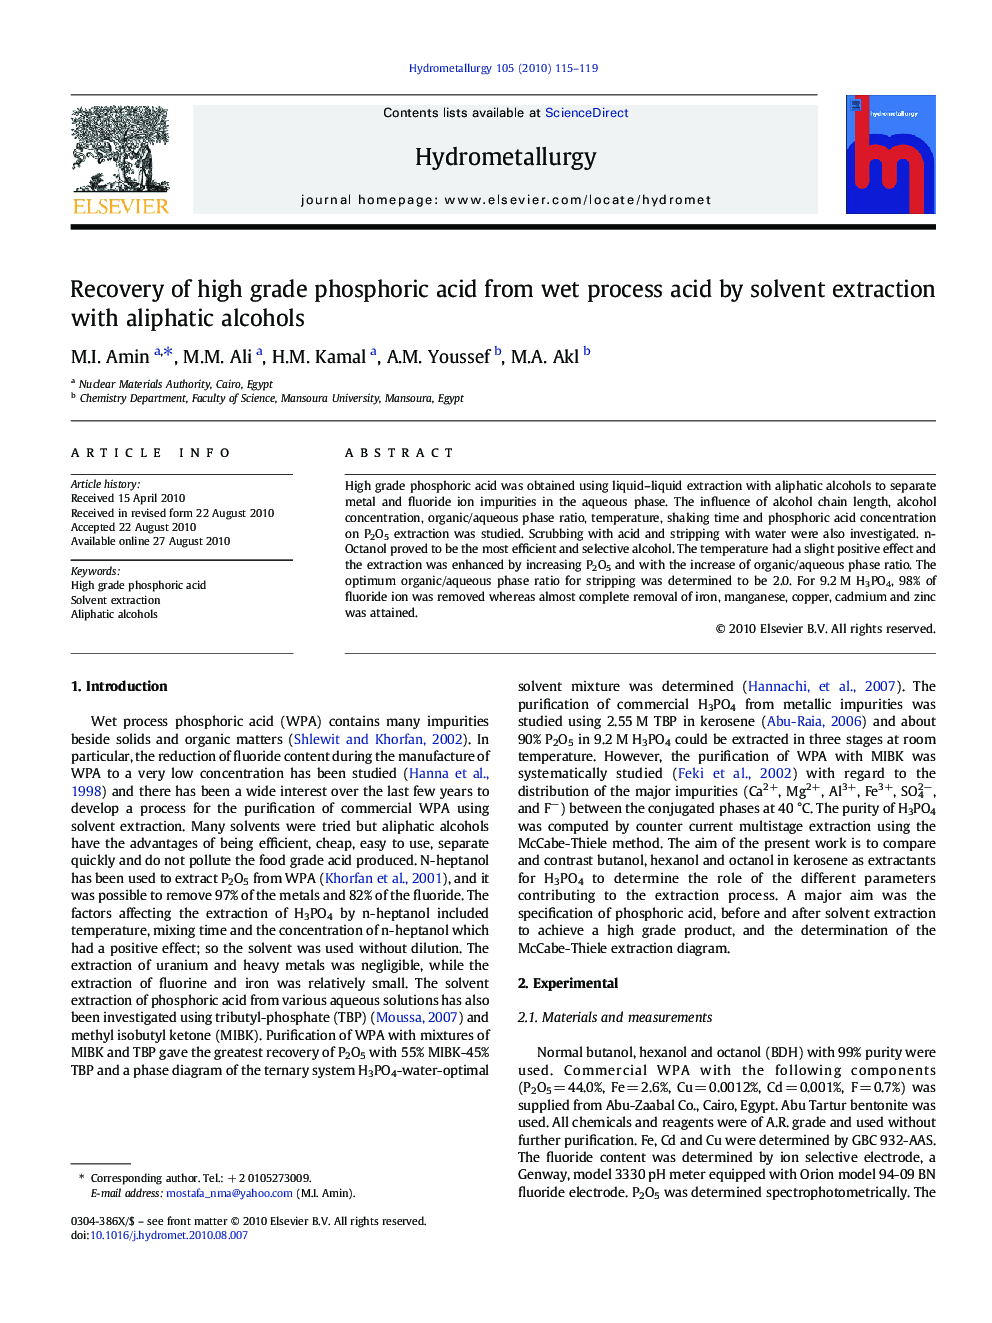 Recovery of high grade phosphoric acid from wet process acid by solvent extraction with aliphatic alcohols